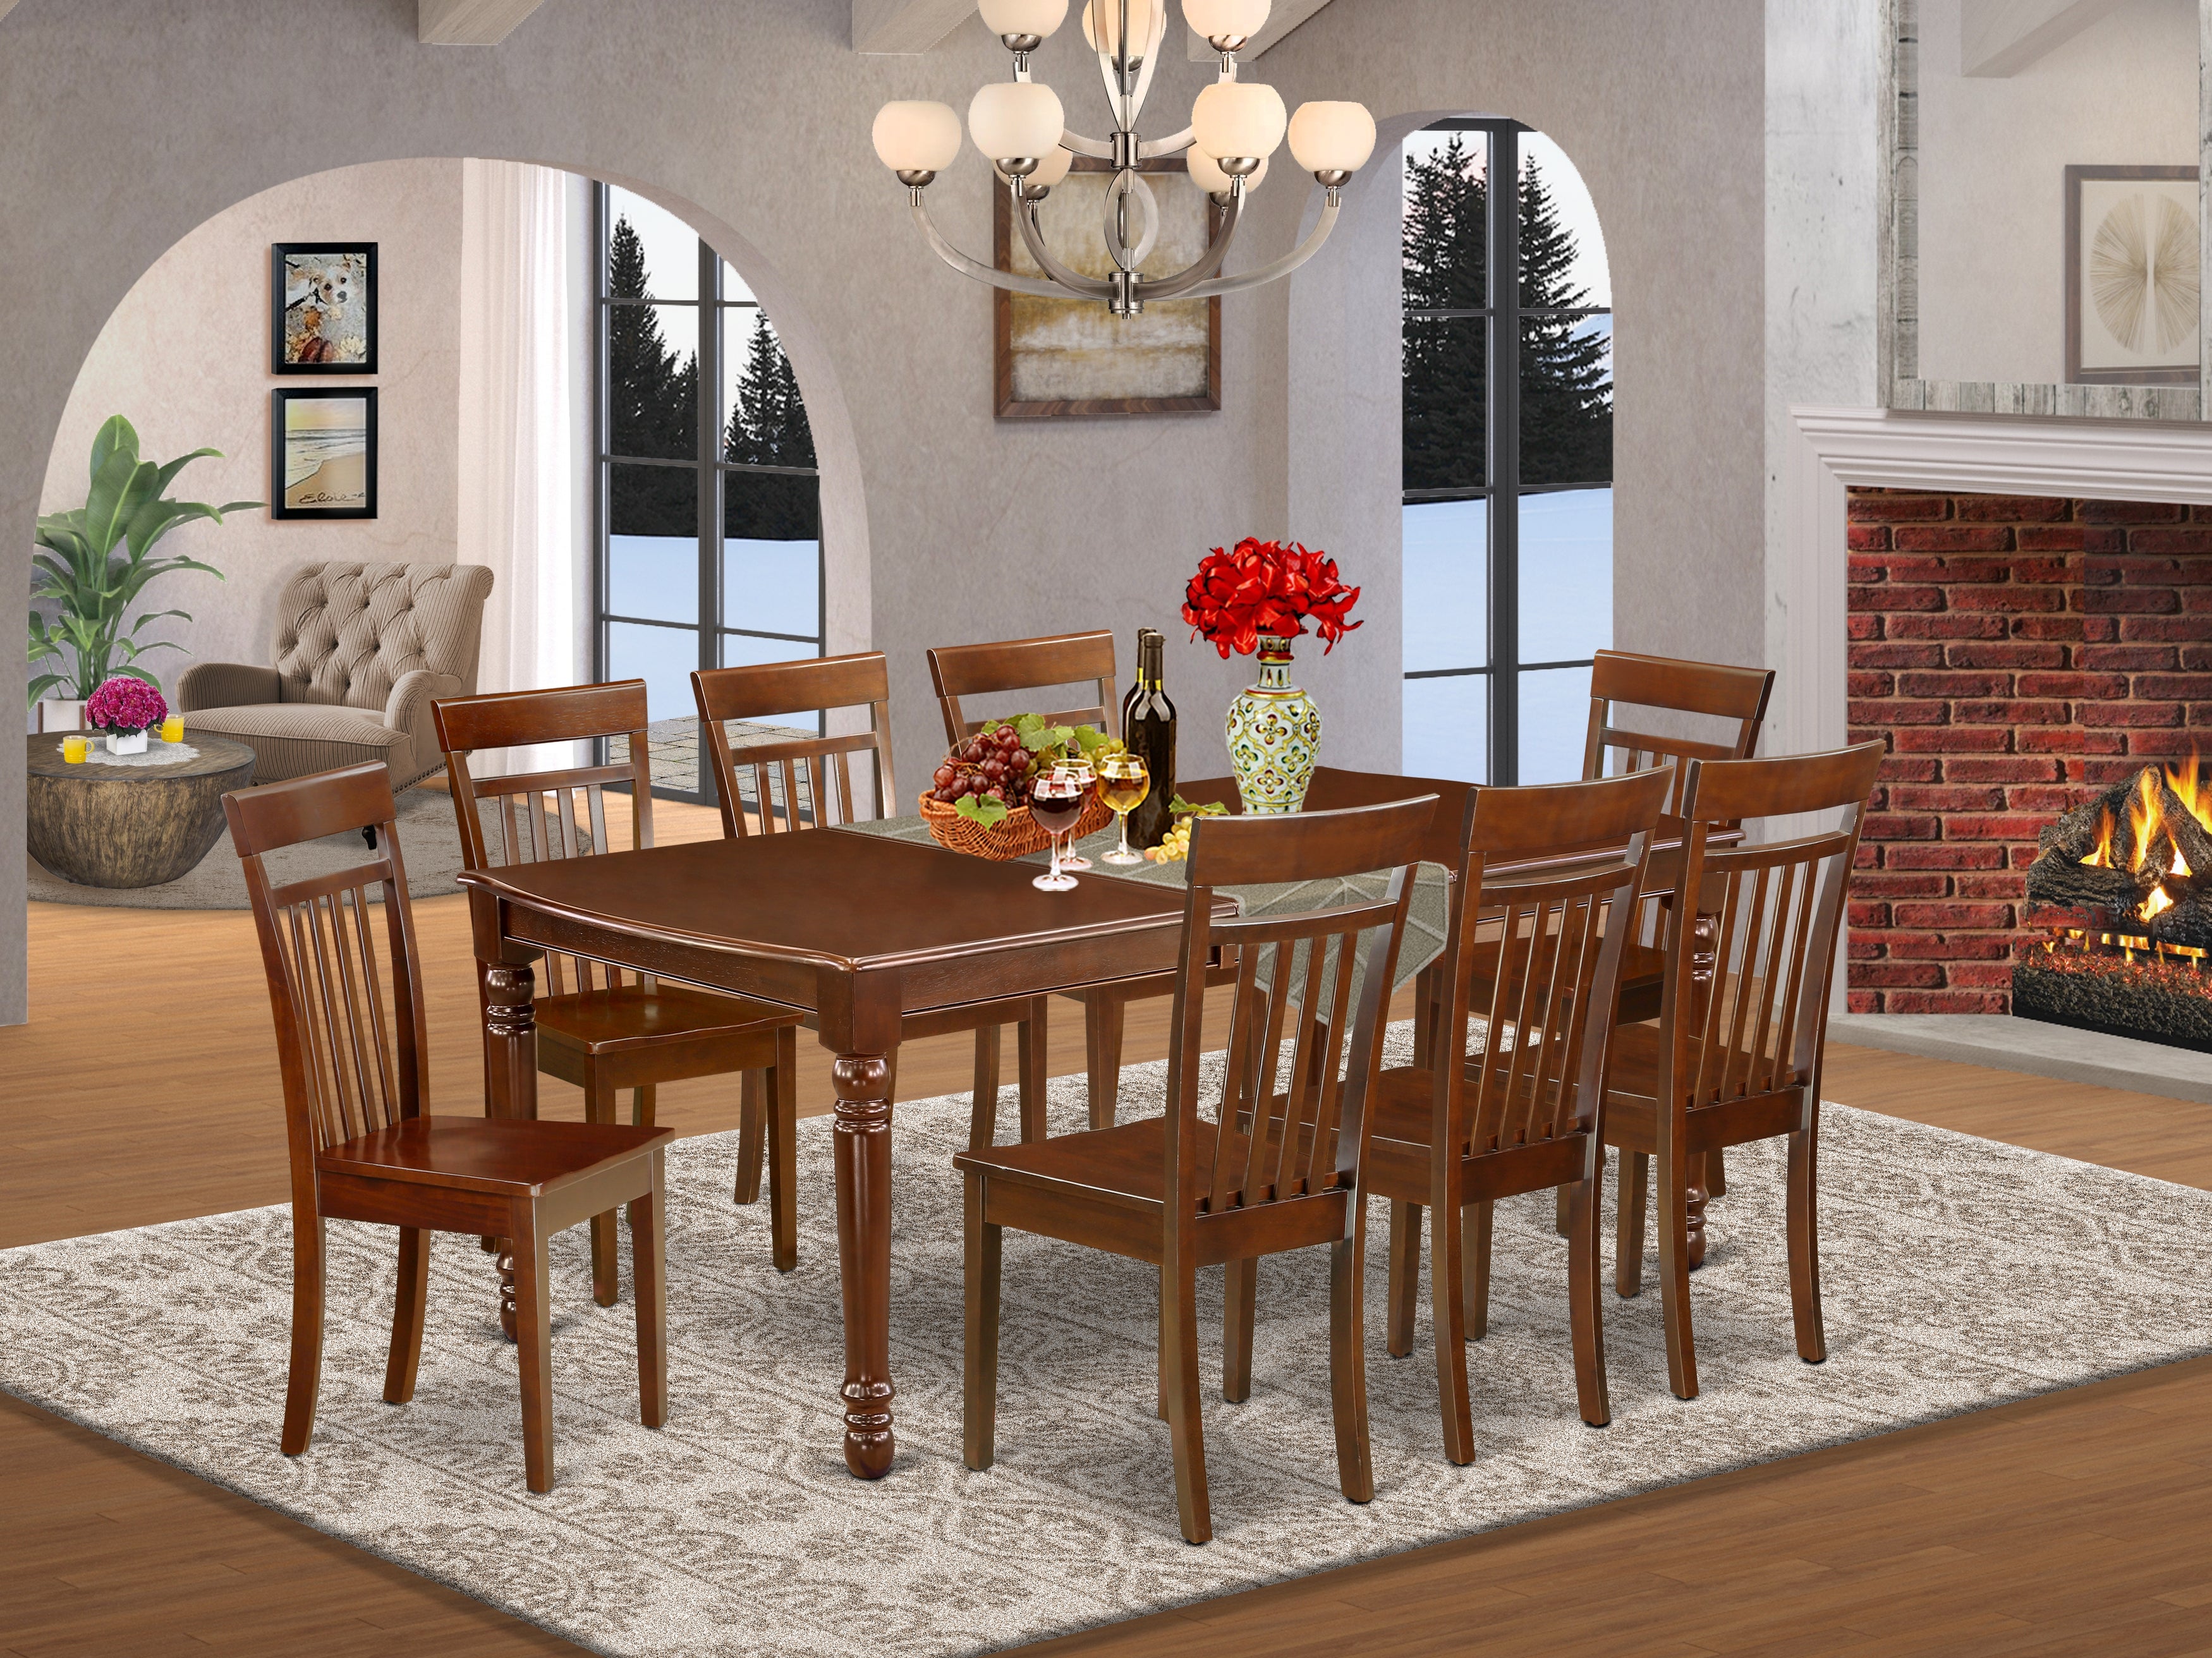 9Pc Mahogany 60/78" Dining Room Table With 18 In Leaf And 8 Wood Seat Chairs Set